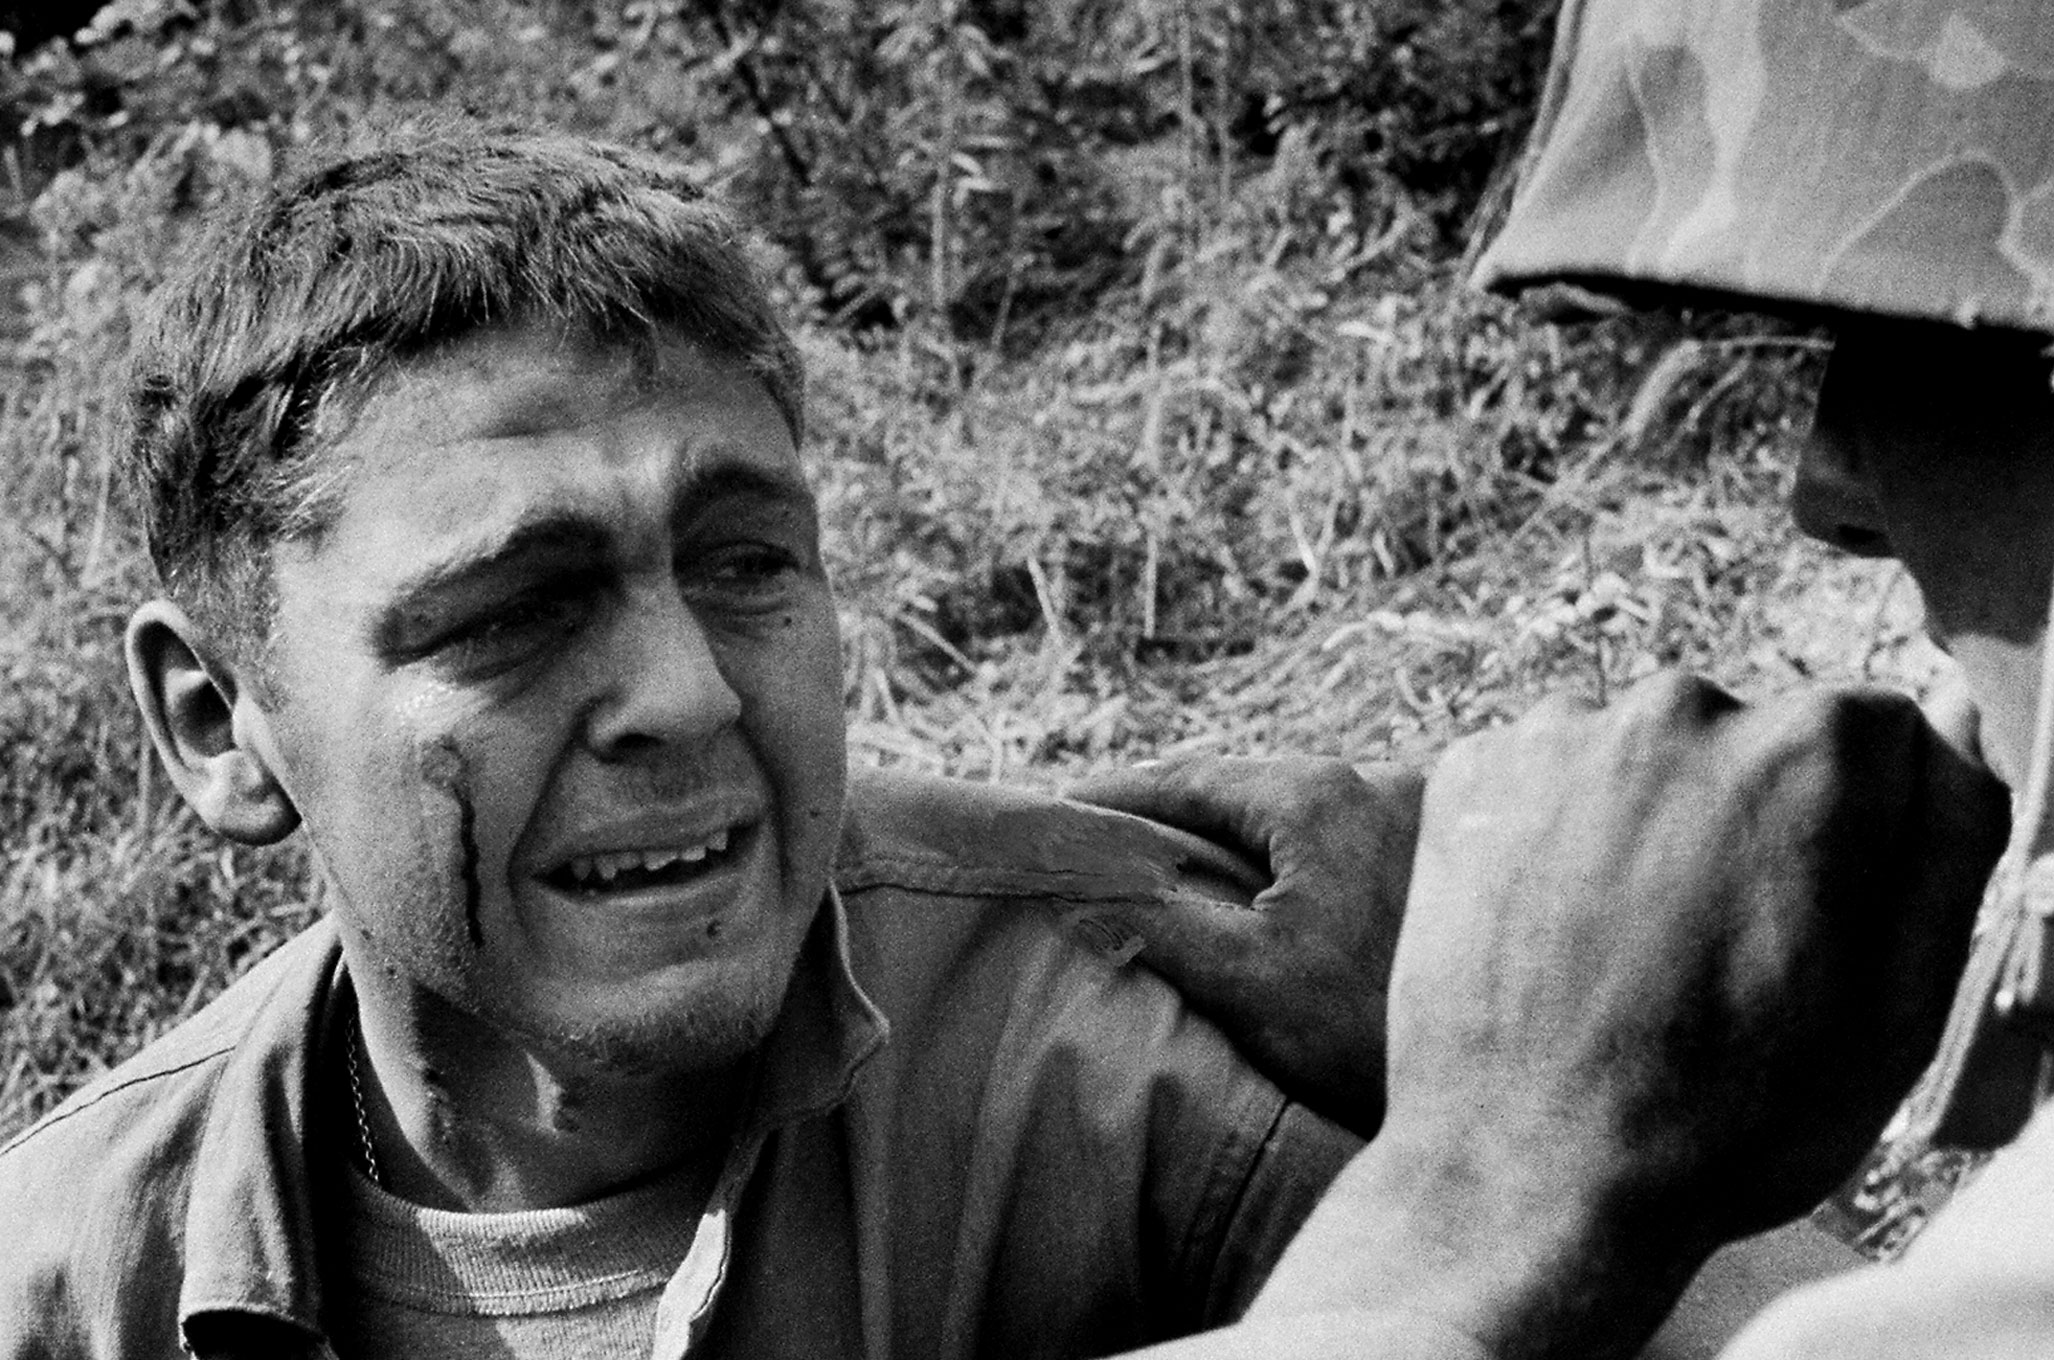 Wounded when a mine blew up his Jeep, an ambulance driver sobs by the side of the road after learning that a friend was killed in the blast, Korea 1950.